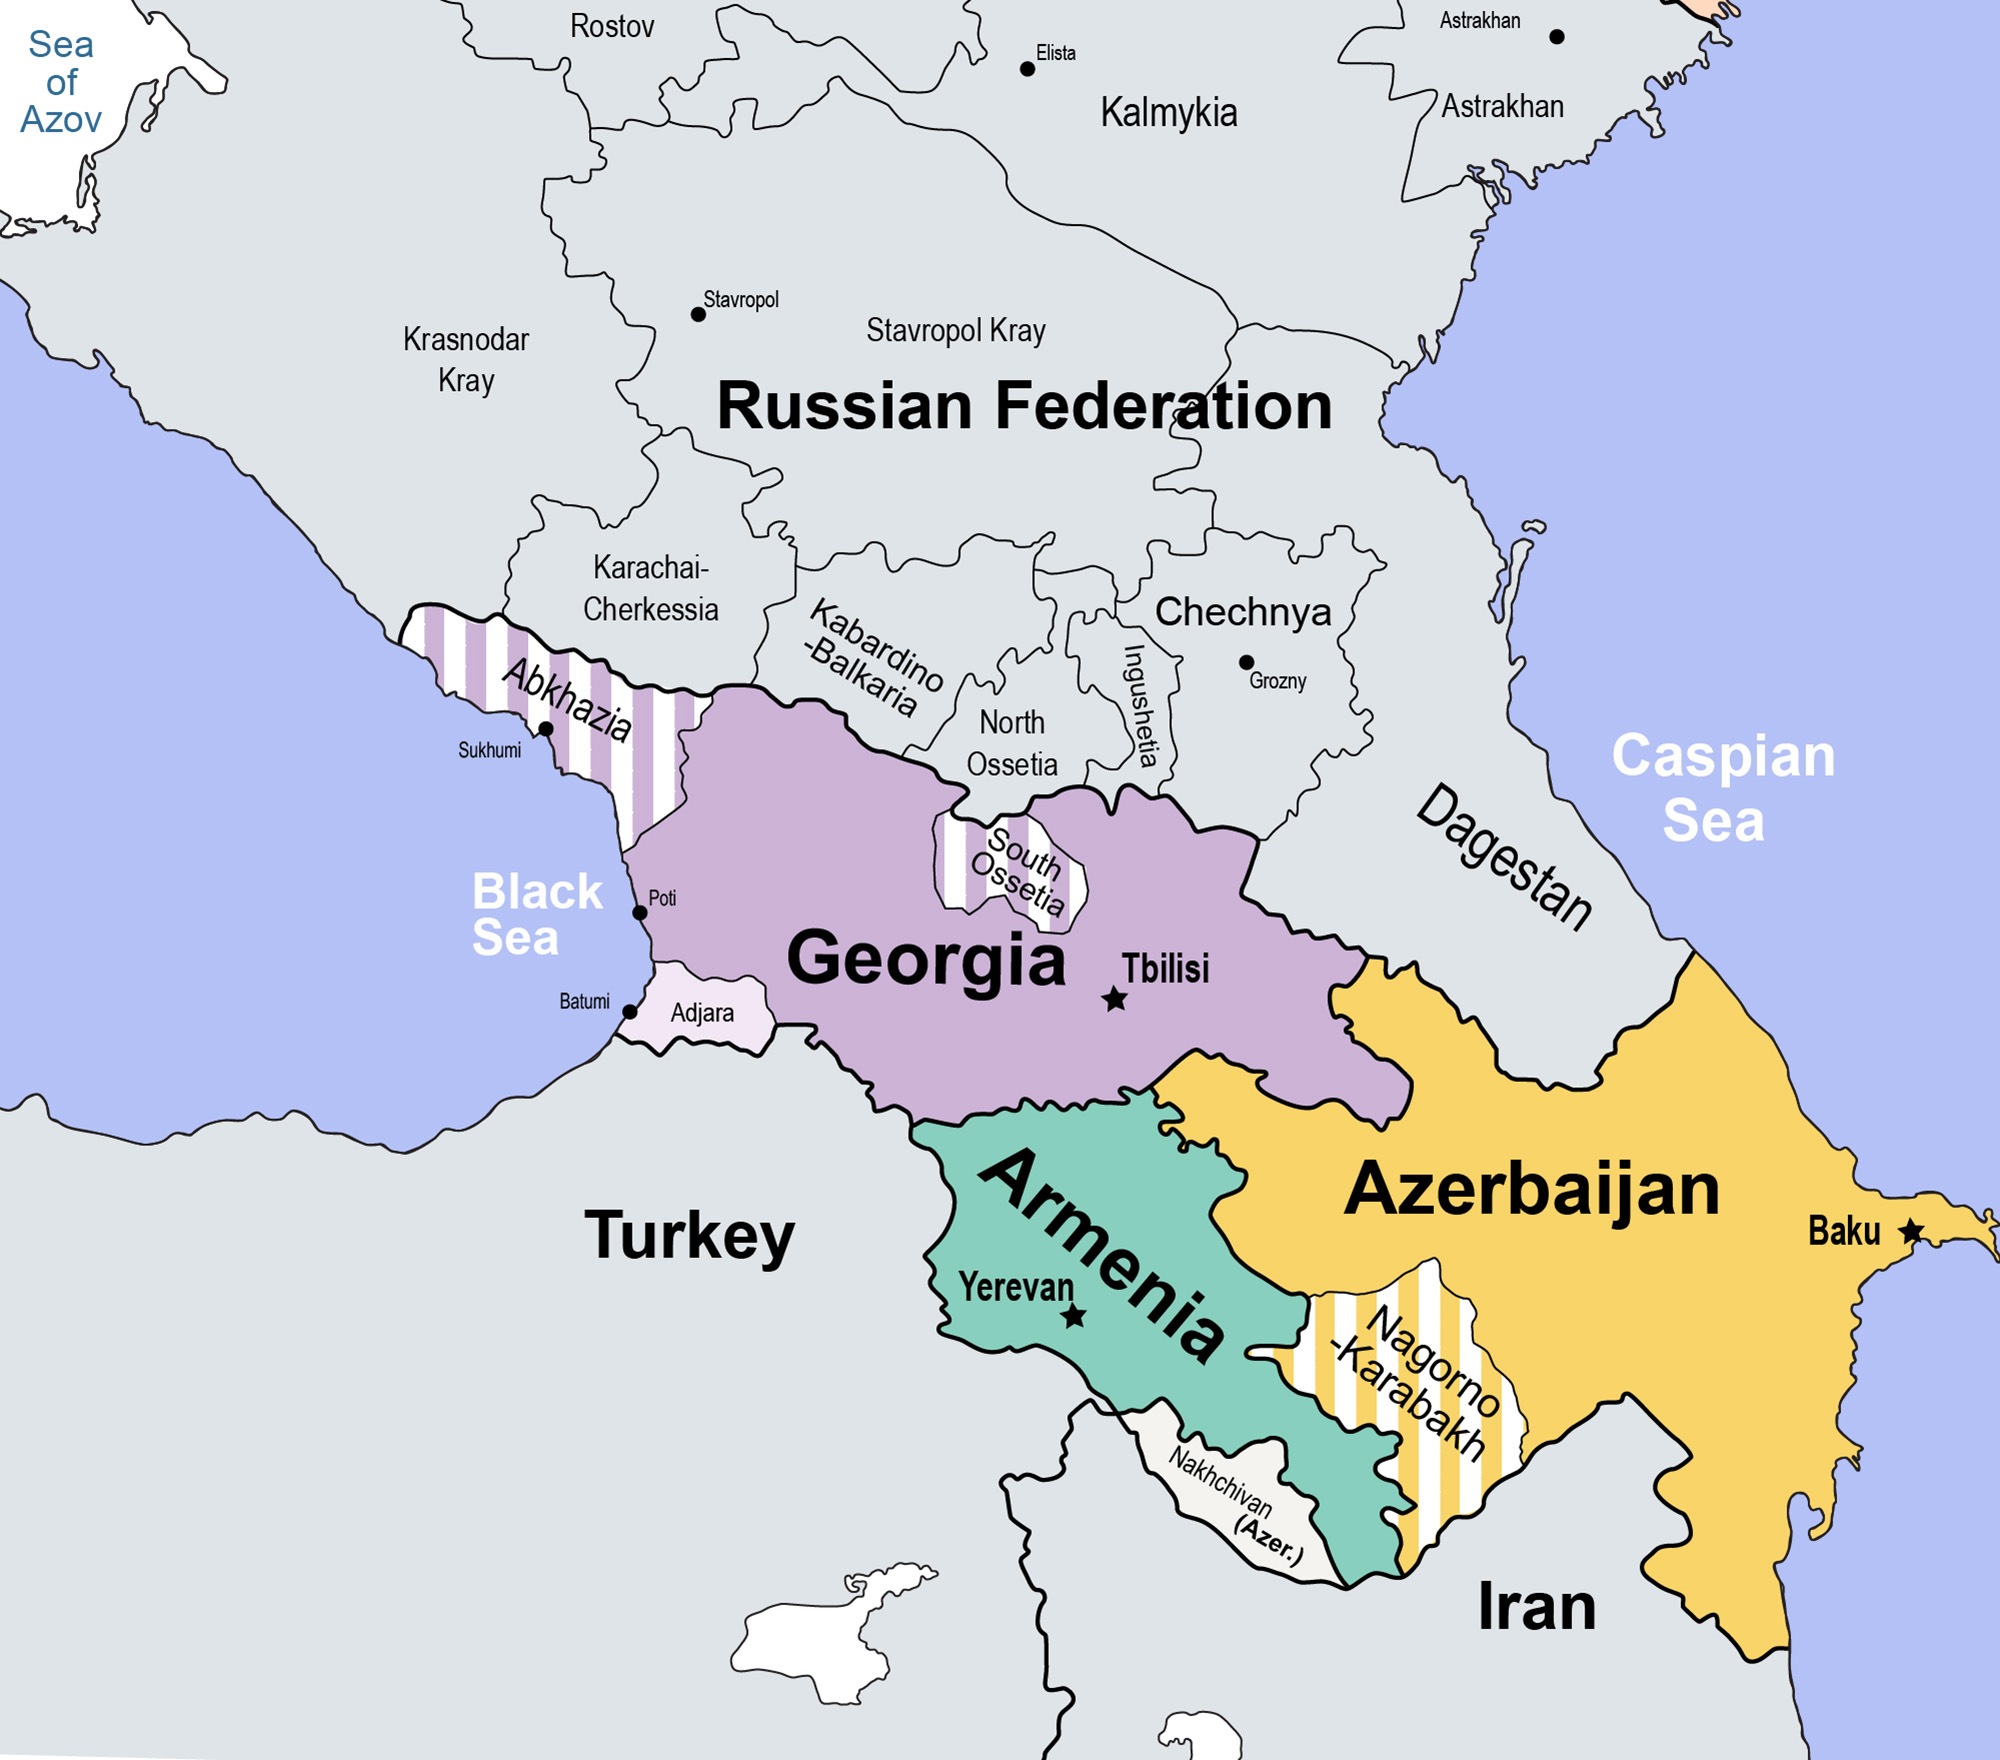 Map of South Caucasus. Source: Jeroenscommons, Wikimedia Commons